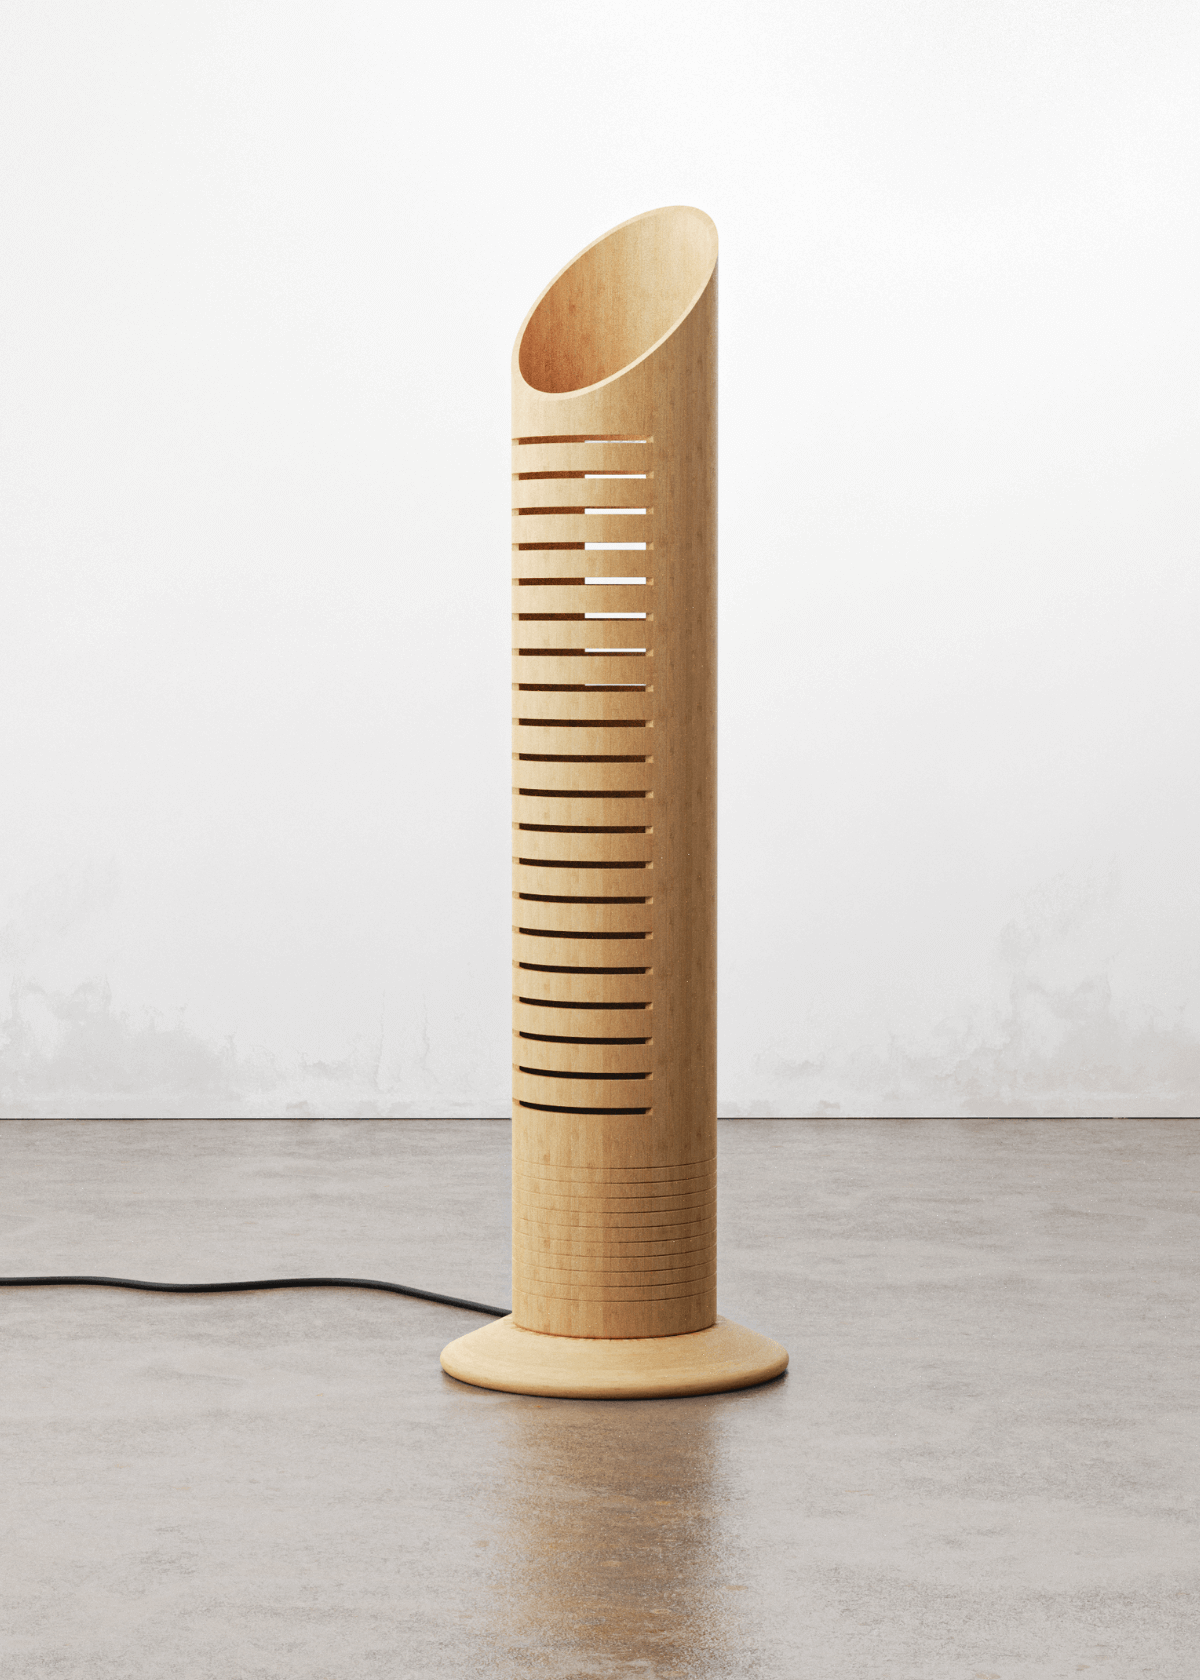 Product picture of bamboo floor lamp by MITI Life